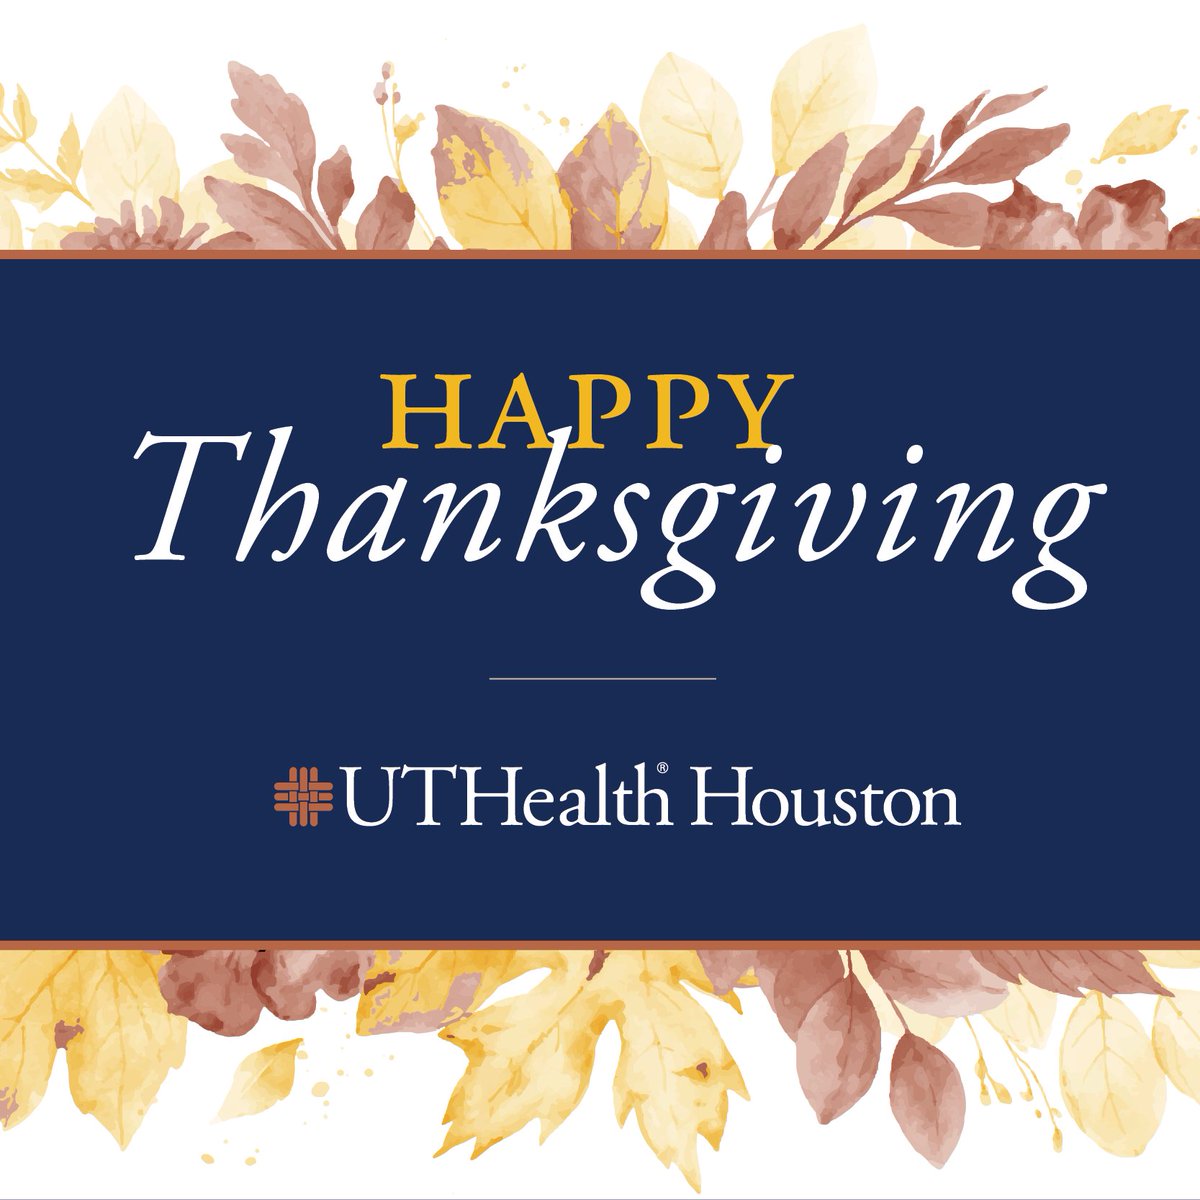 In this season of gratitude, we want to wish you and your loved ones a healthy and #HappyThanksgiving.